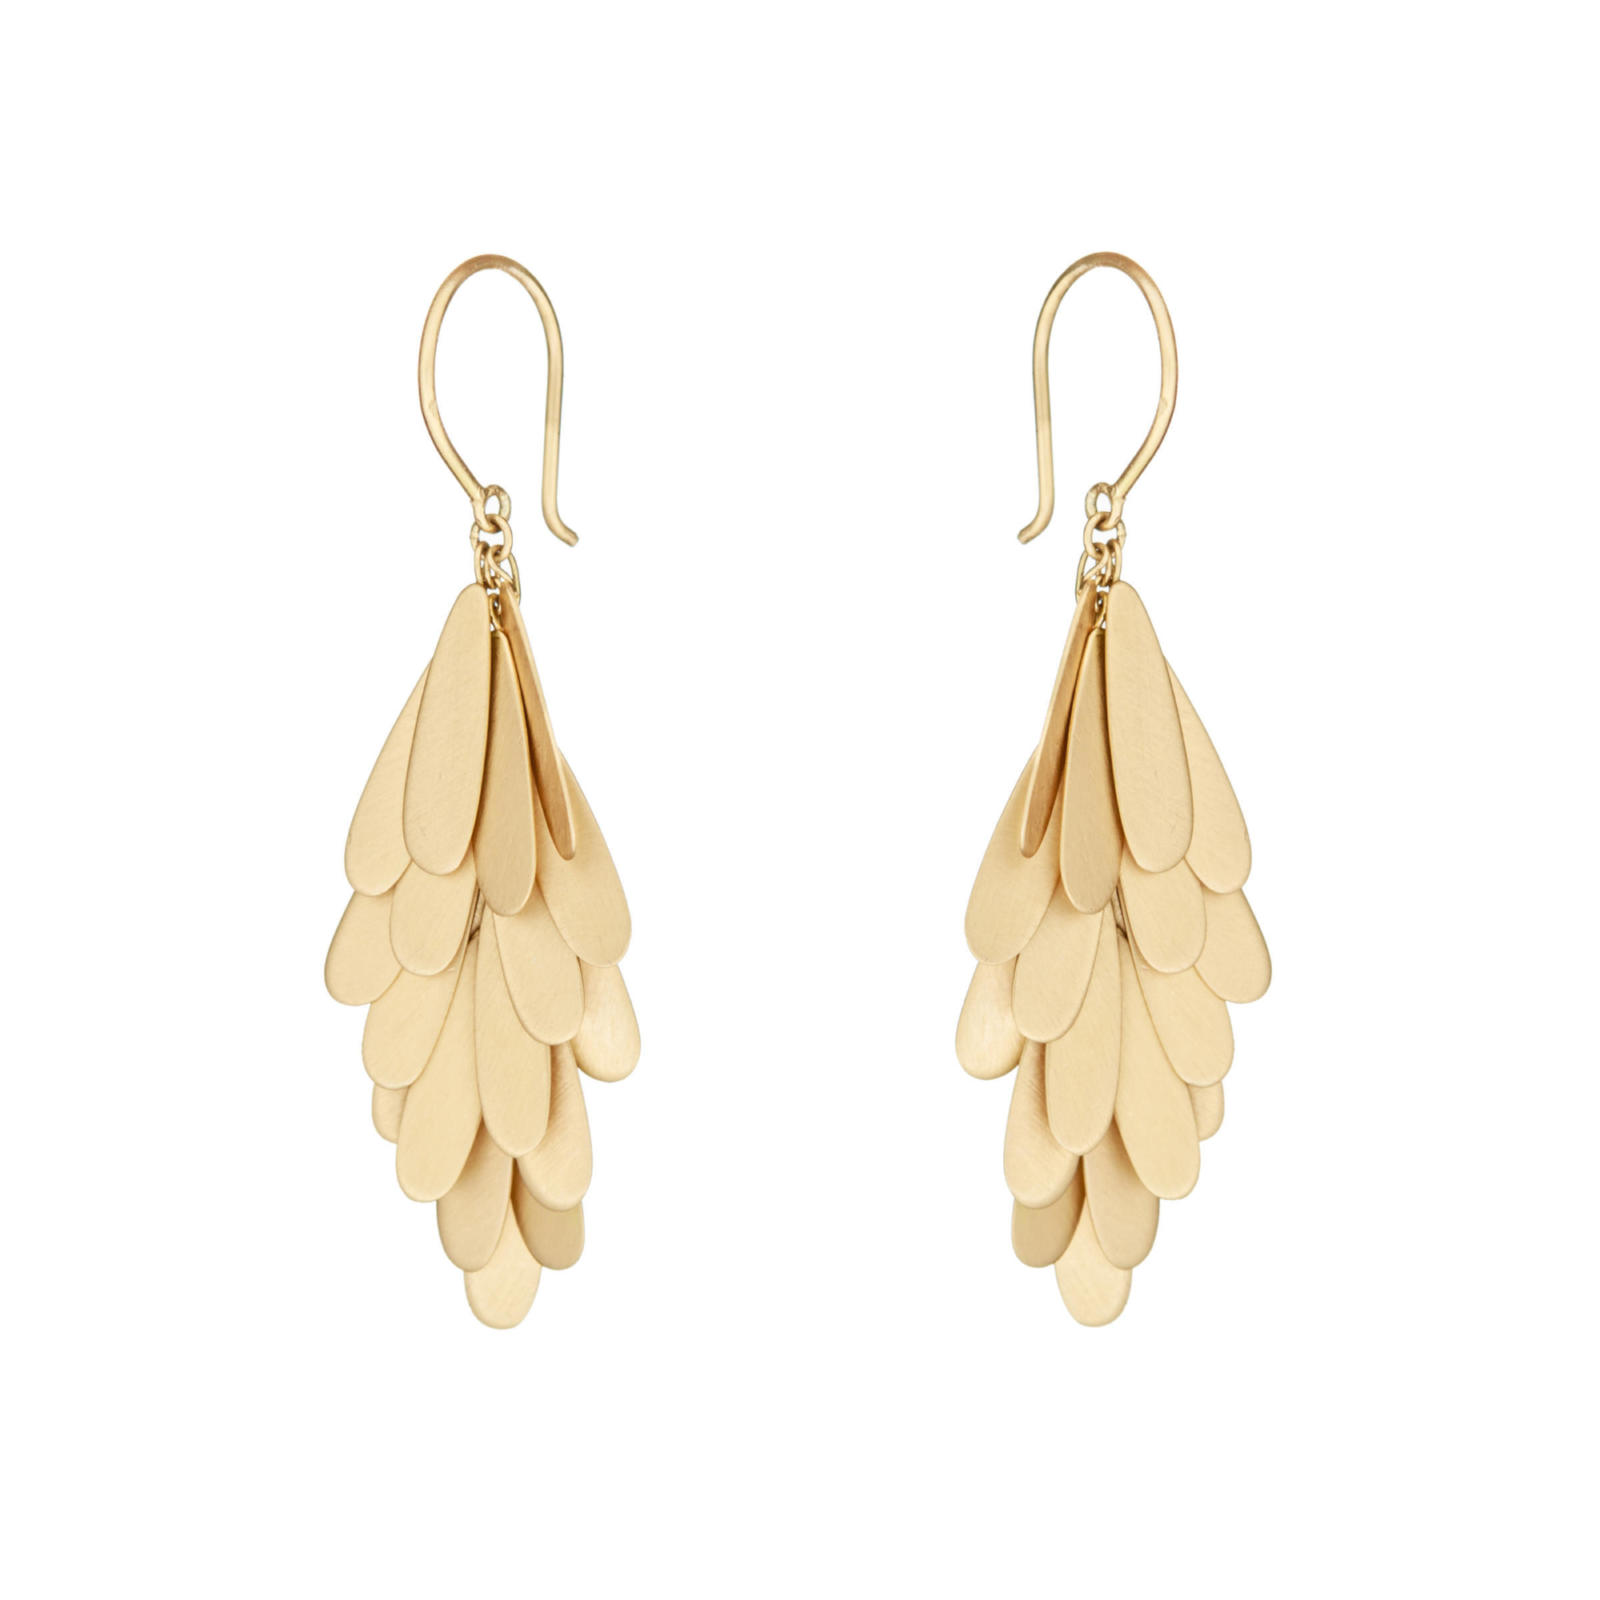 Sia Taylor ME12 Y Yellow Gold Earrings S